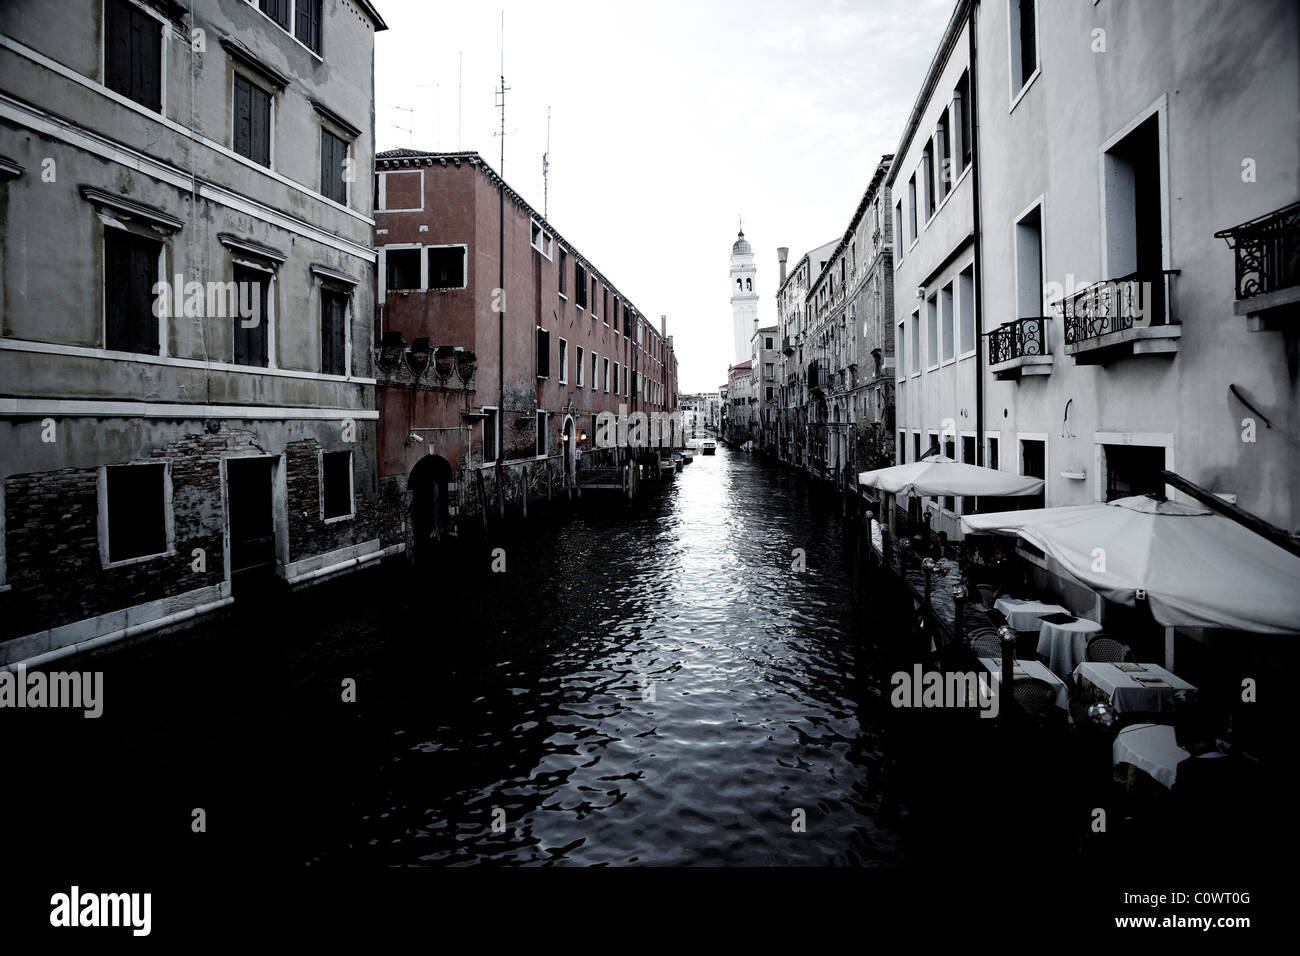 A venetian waterway canal in Venice Italy Stock Photo